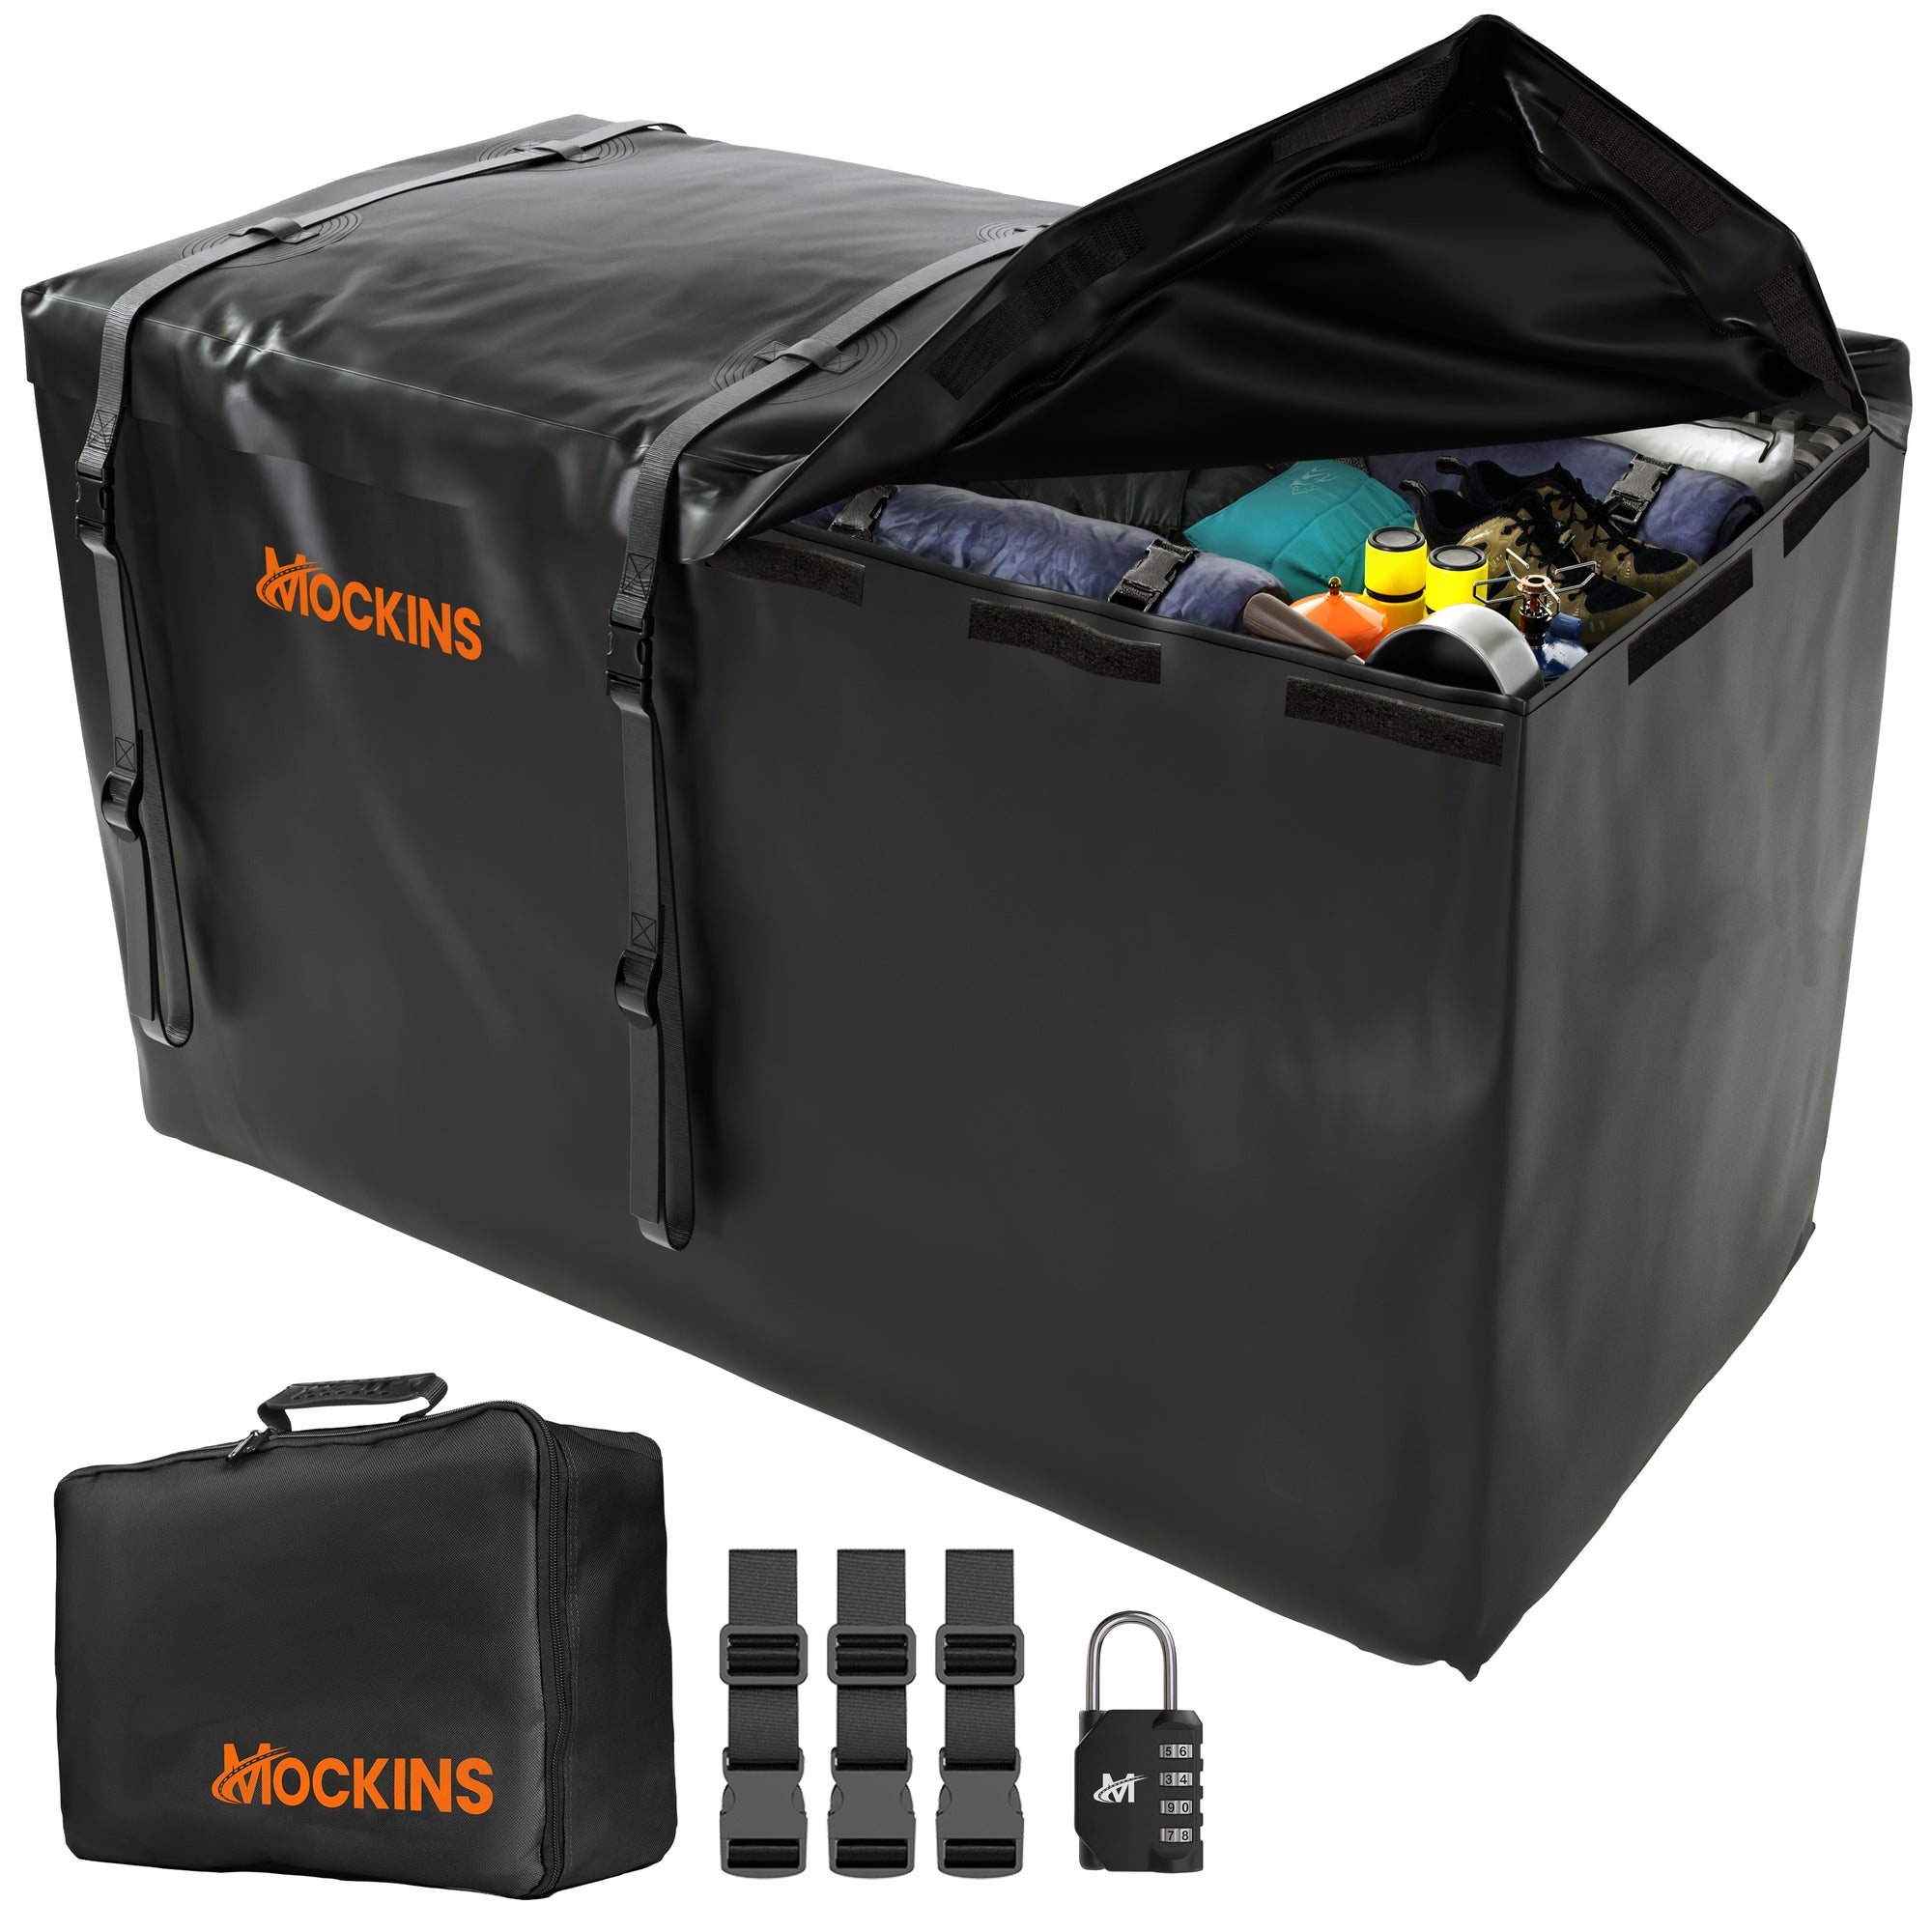 70"x33"x30" Waterproof Cargo Bag | 40 Cu. Ft. Hitch Bag with Lock, Straps and Storage Bag